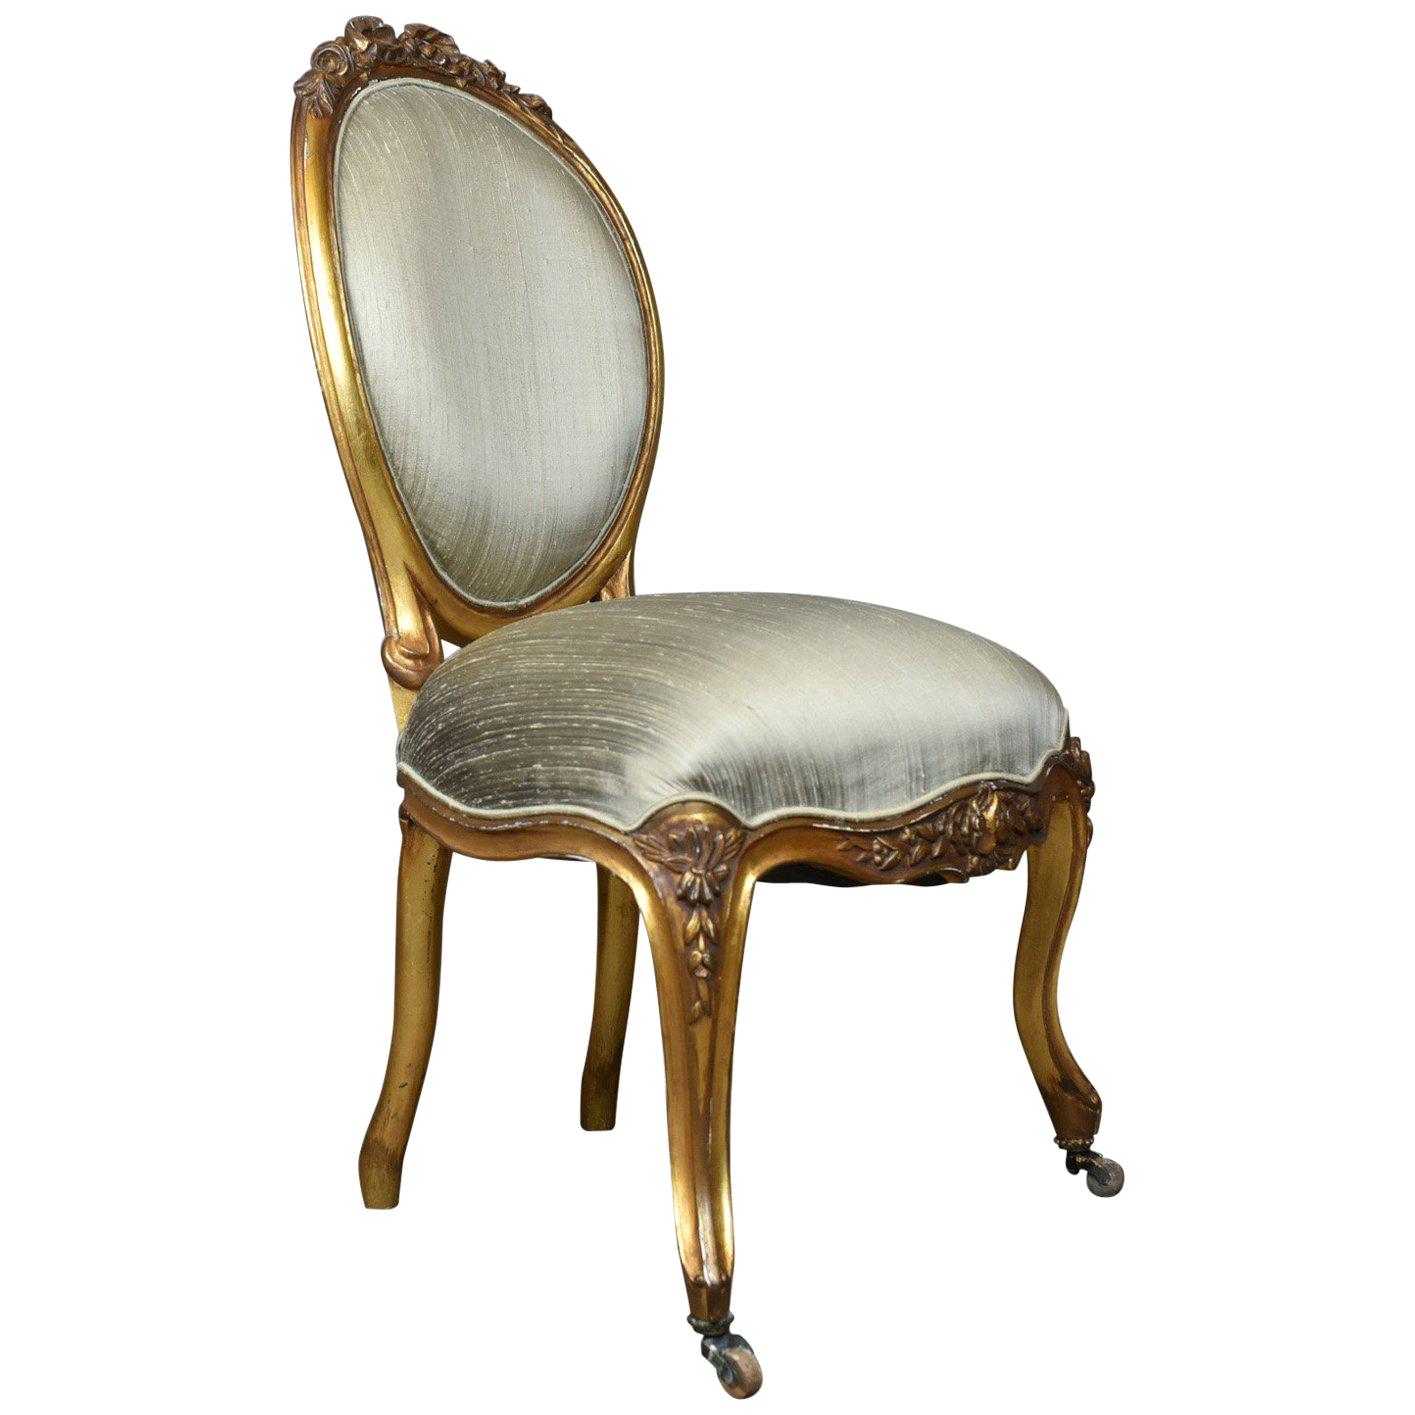 Vintage 20th Century Salon Chair in Antique French Taste, Giltwood, circa 1970 For Sale